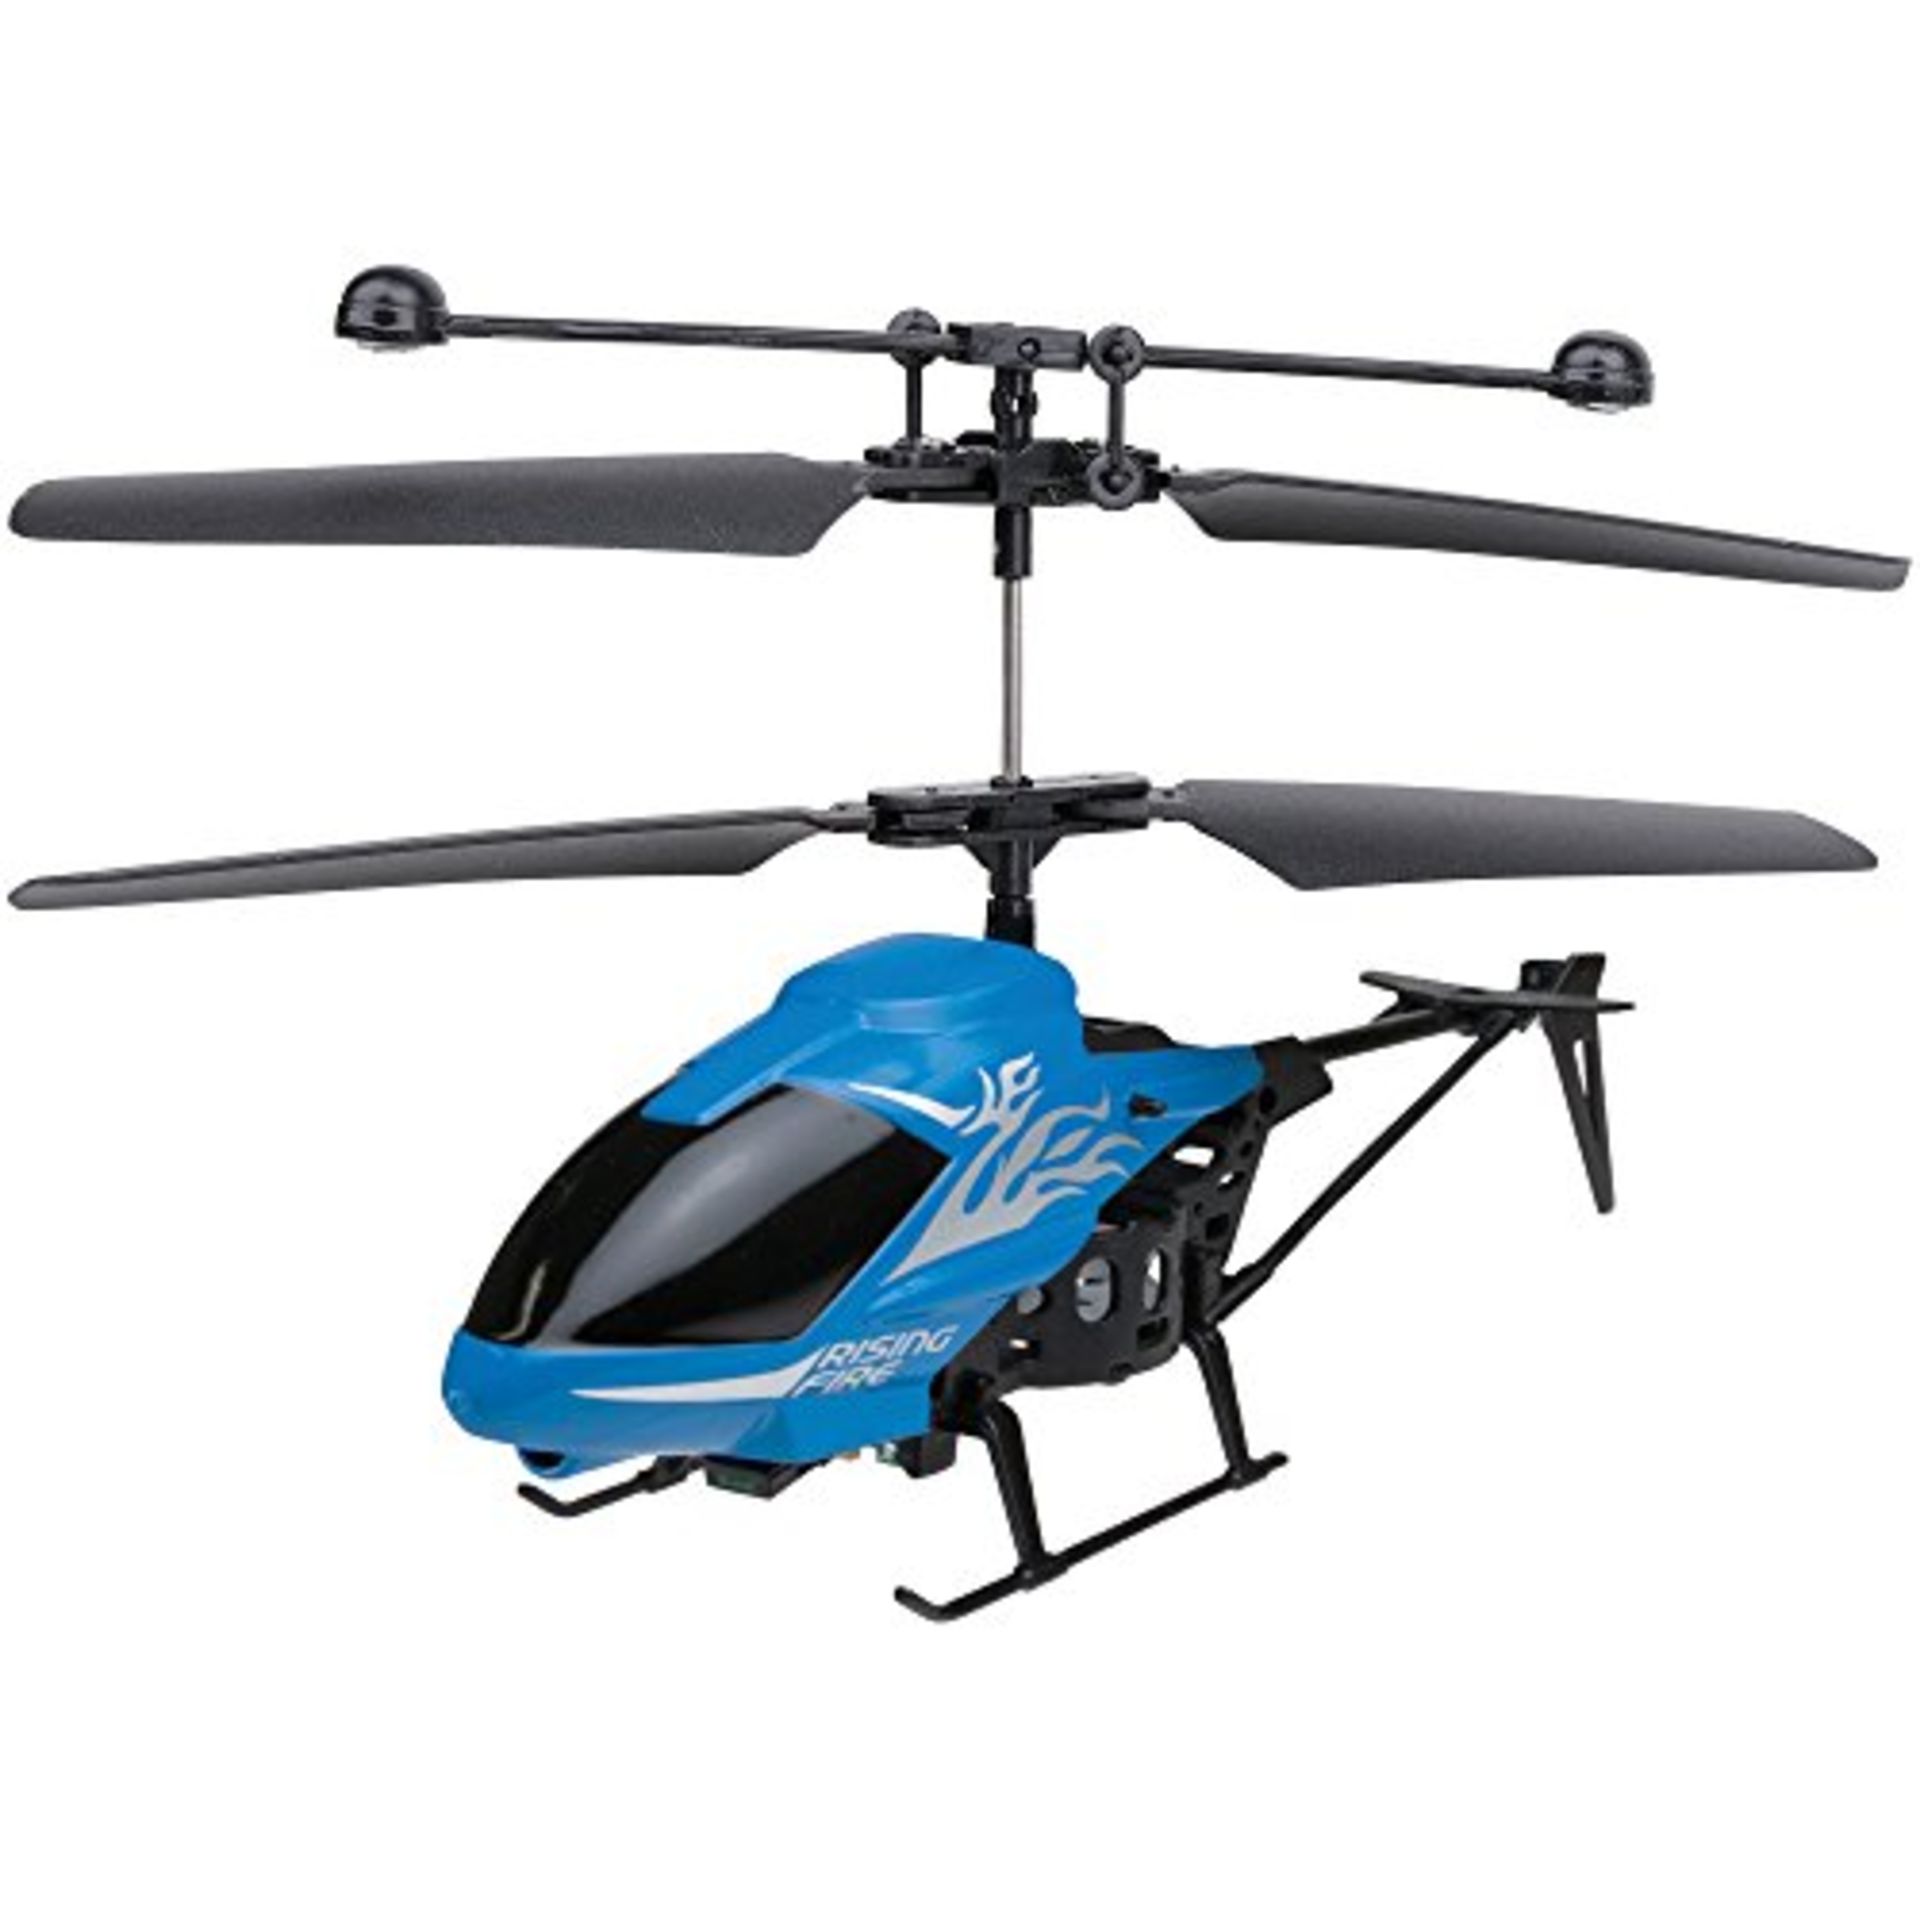 V Brand New Interceptor X-20 Radio Controlled Helicopter Brand New Sealed Complete With Controller